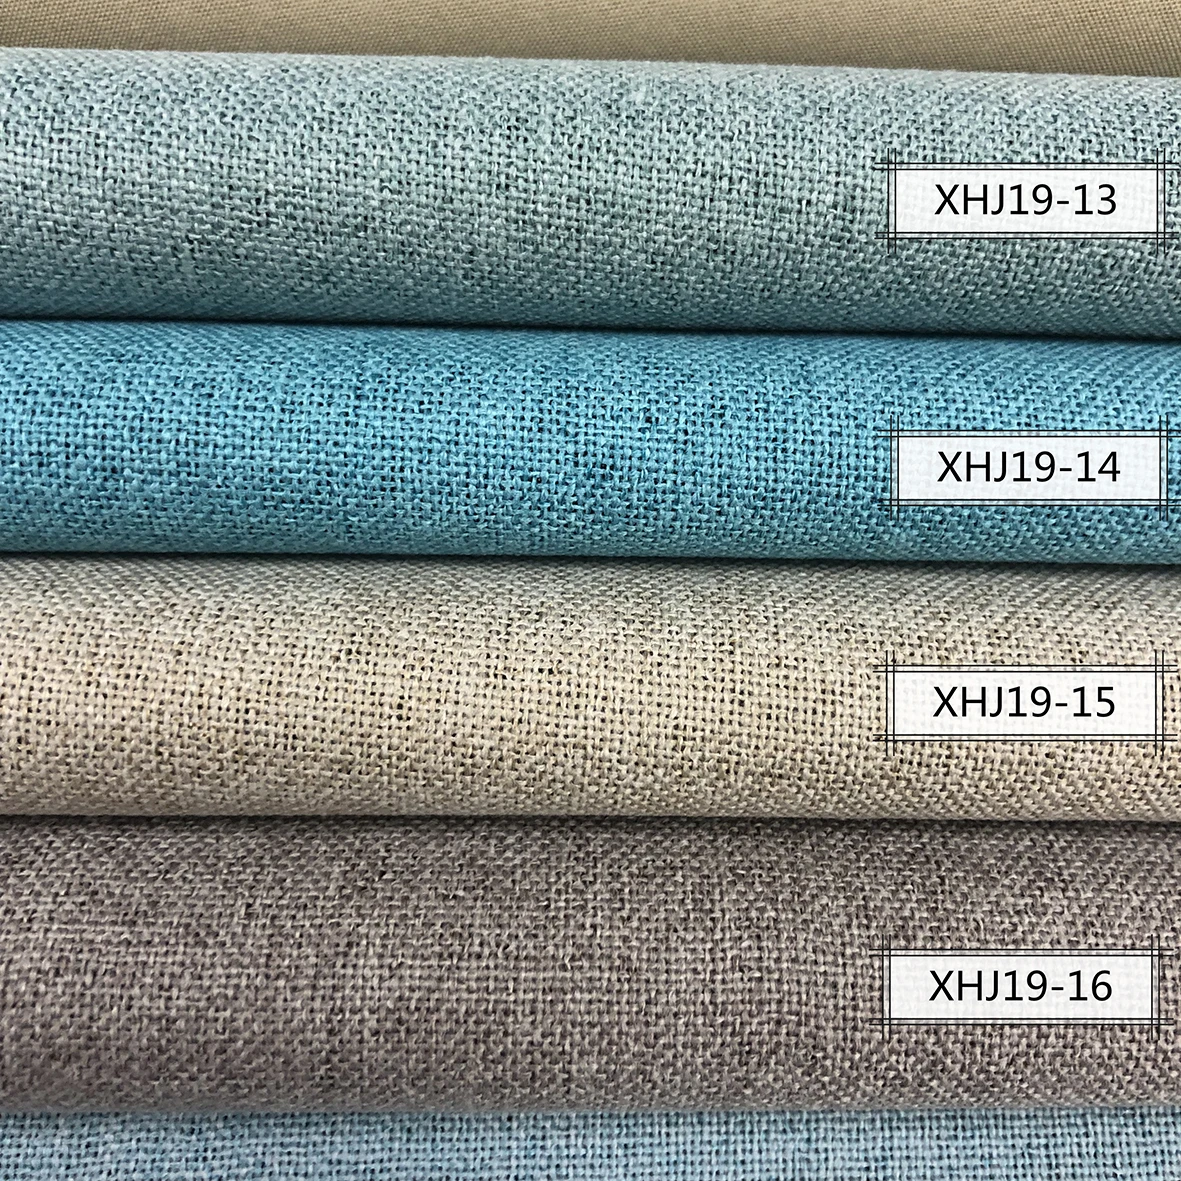 Hot sale full blackout solid color polyester curtain fabric simple style plain linen for living room windows decoration